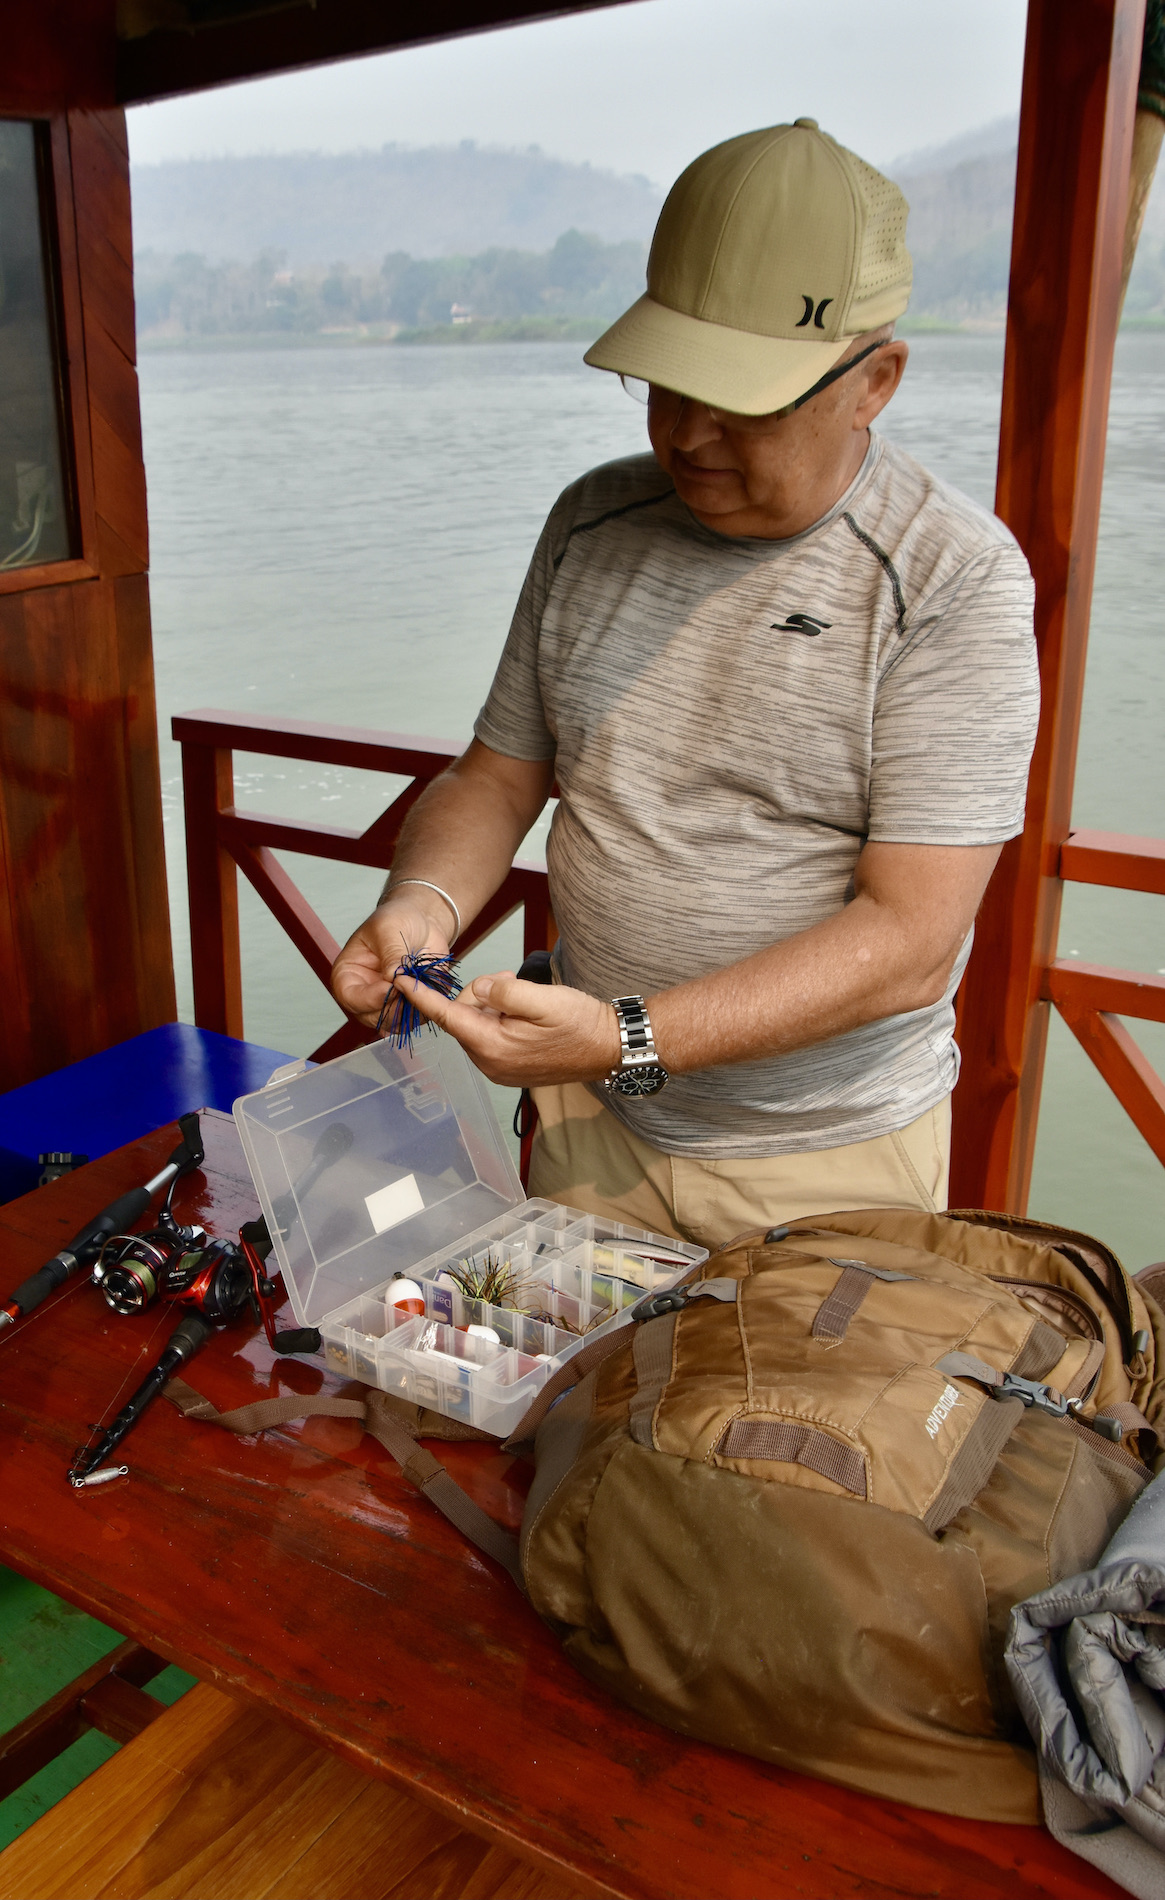 Claude Inspects His Fishing Tackle on the Mekong River